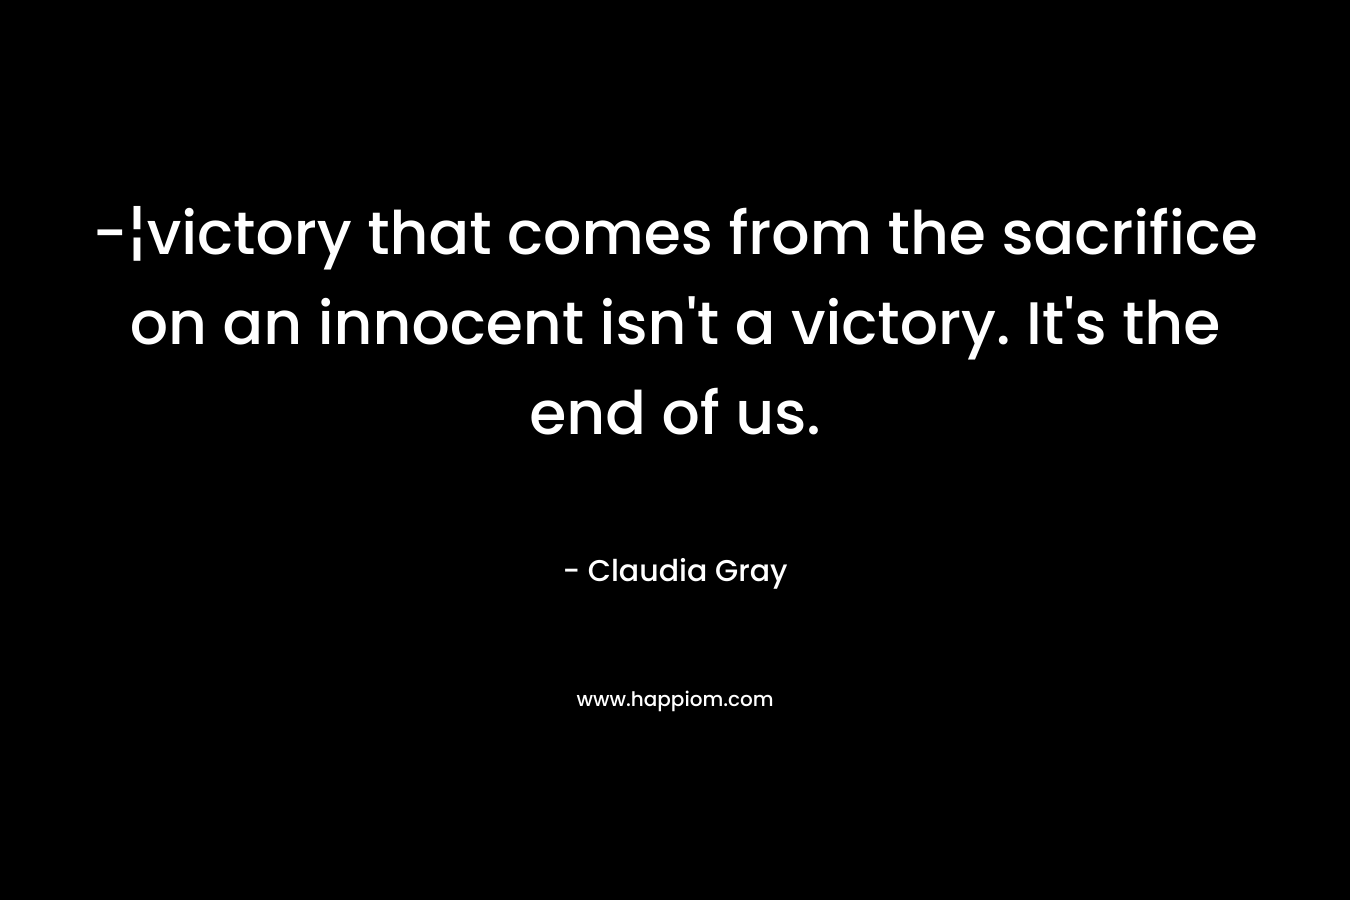 -¦victory that comes from the sacrifice on an innocent isn't a victory. It's the end of us.